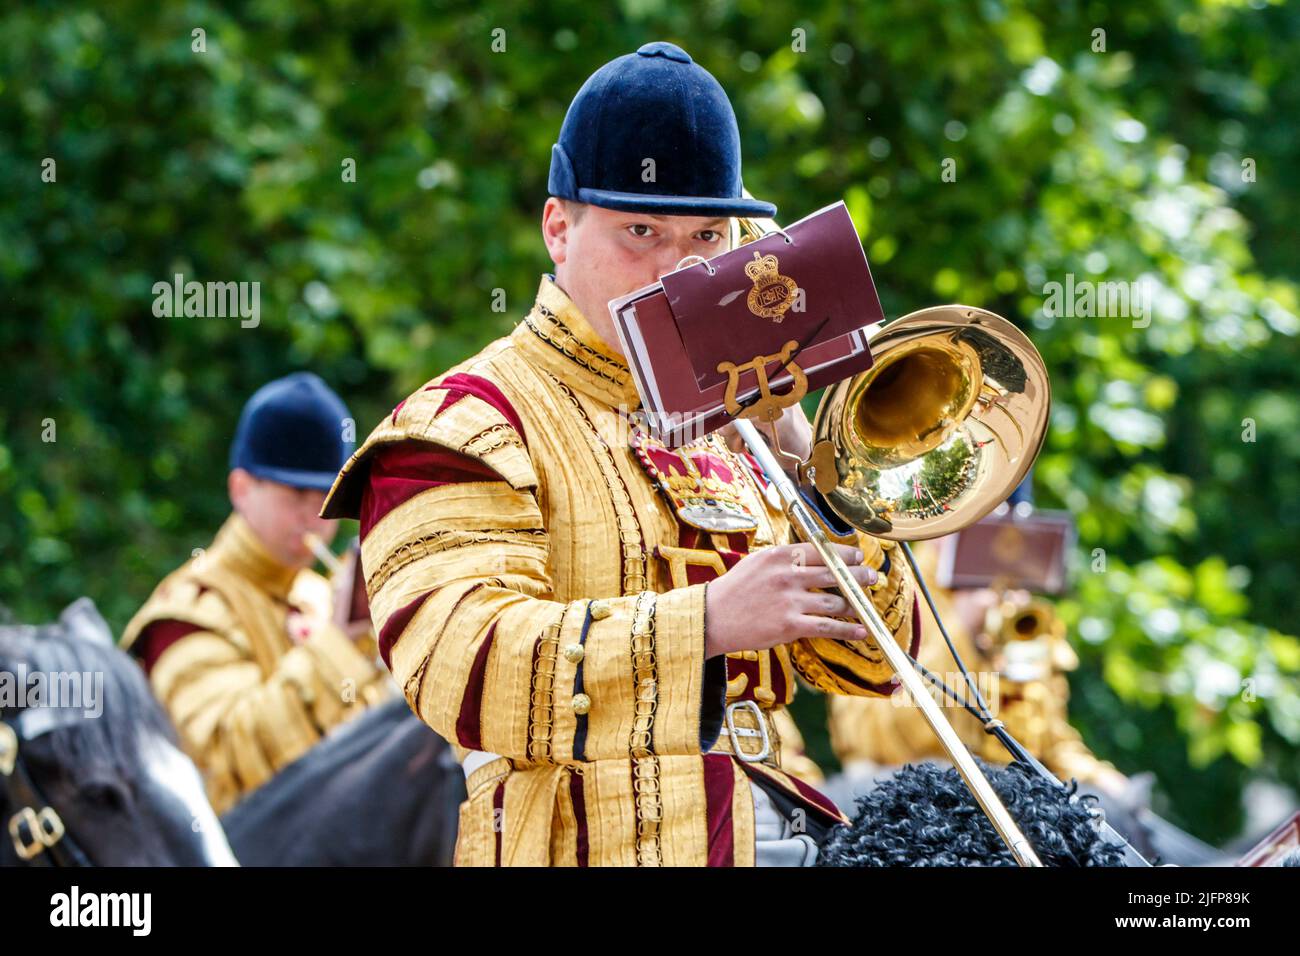 Mounted Band of the Household Cavalry bei Trooping the Color, Colonel’s Review in der Mall, London, England, Großbritannien, am Samstag, den 28. Mai 2022. Stockfoto